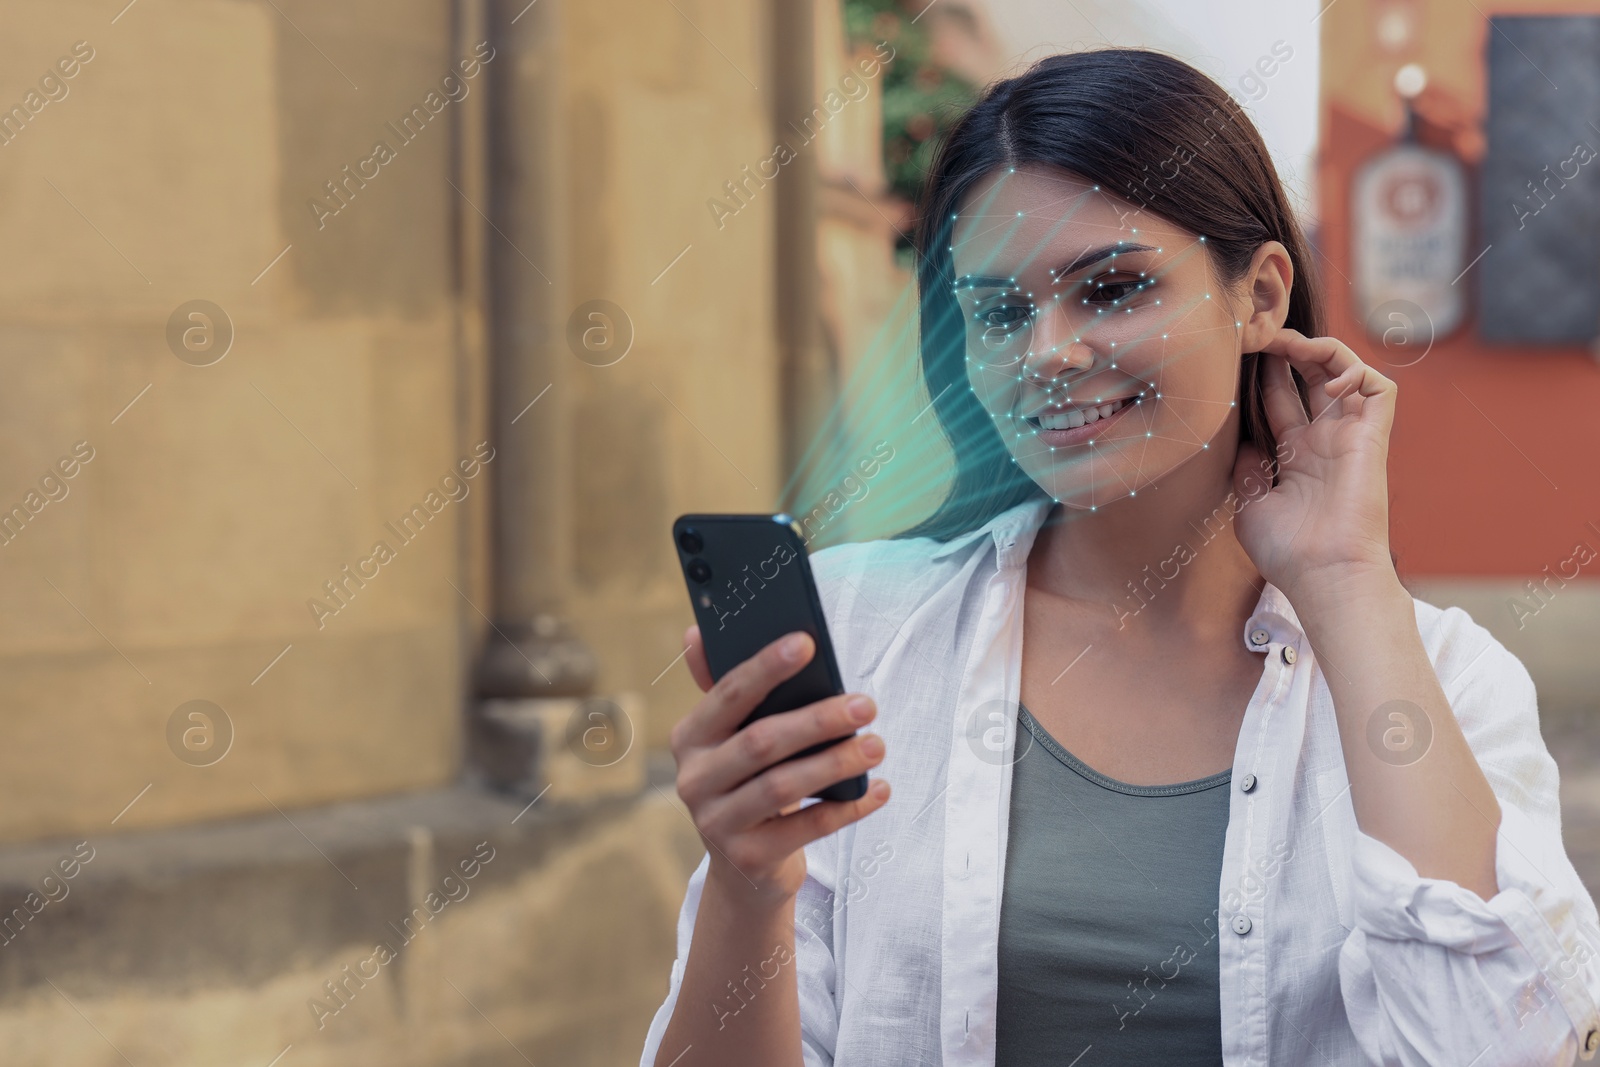 Image of Woman using smartphone with facial recognition system on street. Security application scanning her face for approving owner's identity